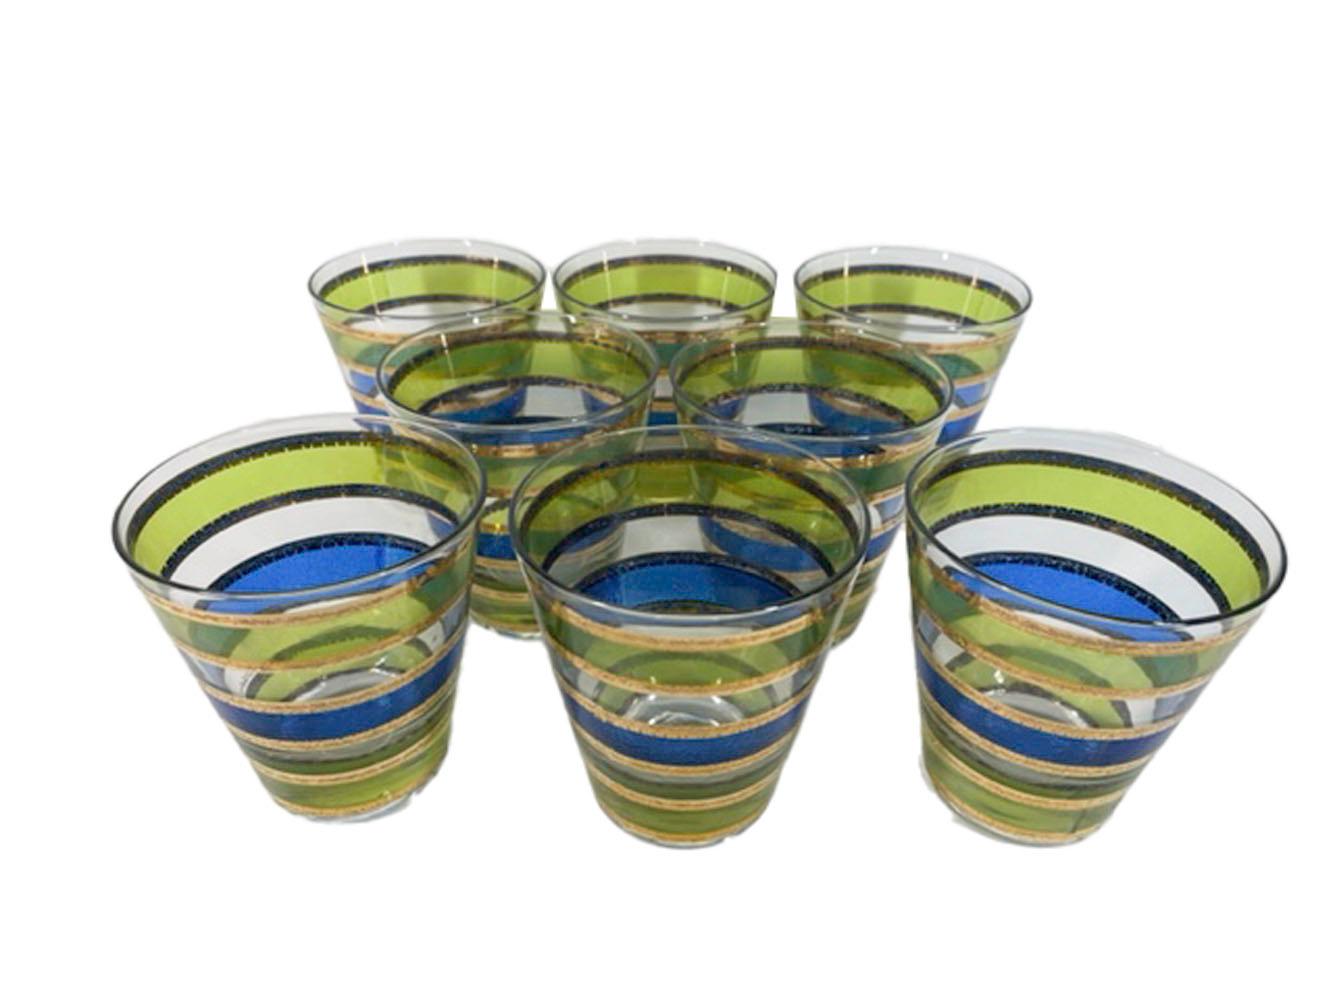 Eight vintage double old fashioned glasses by Culver, LTD. in the Rondo pattern. Decorated with a band of translucent blue enamel between bands of translucent green enamel and with the bands having borders of 22k gold with irregular edges and raised